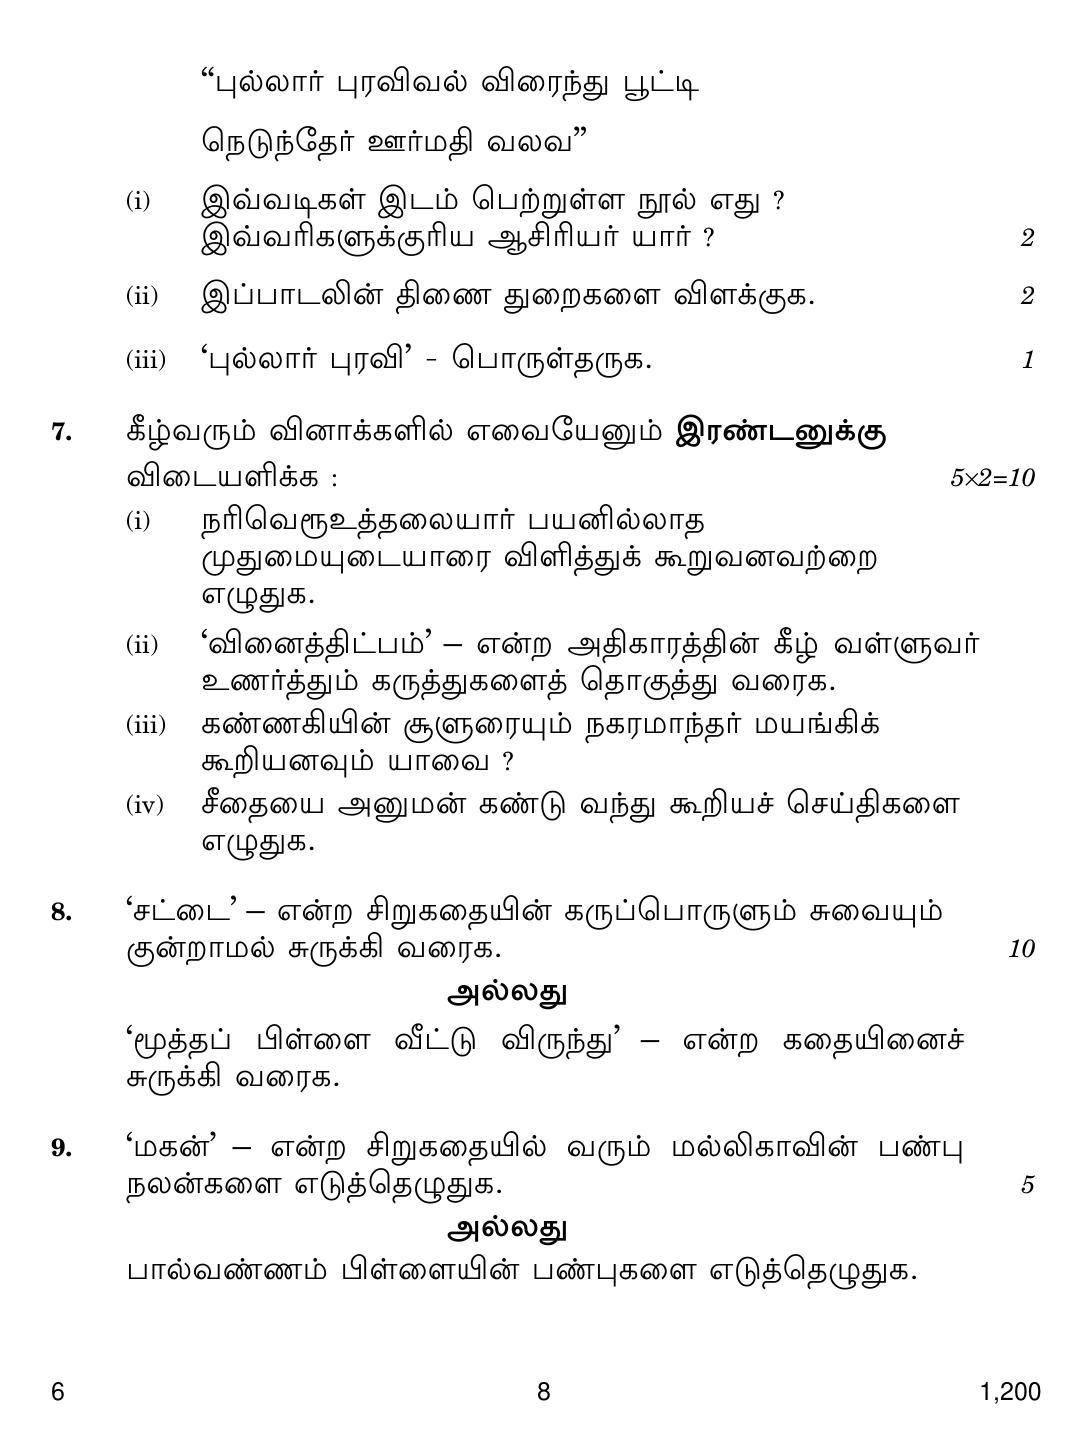 CBSE Class 12 6 Tamil 2018 Question Paper - Page 8